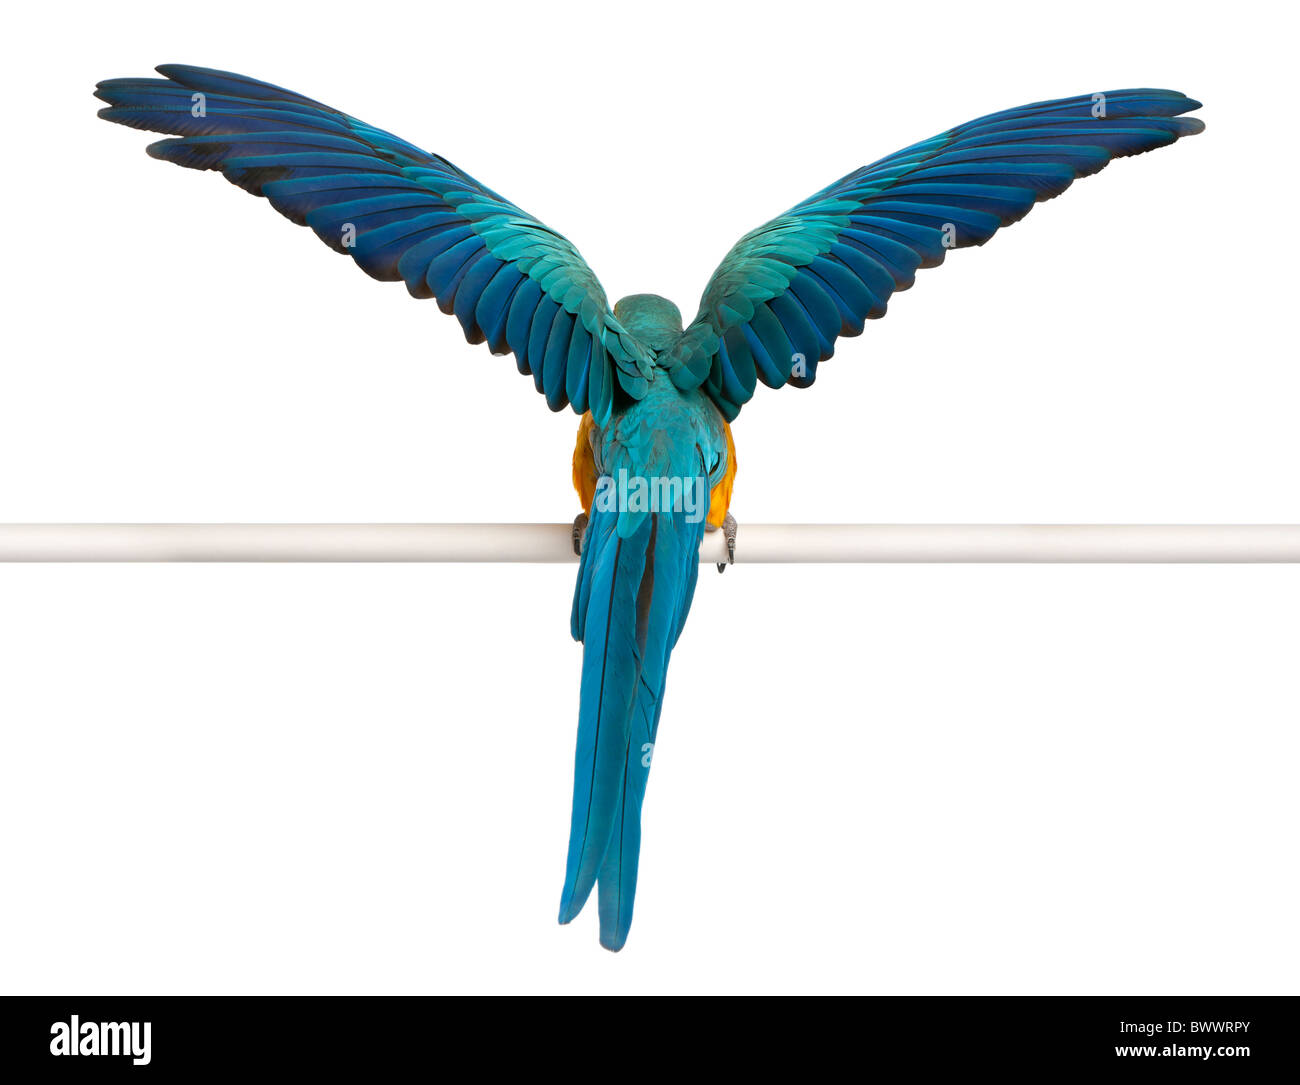 Rear view of Blue and Yellow Macaw, Ara Ararauna, perched and flapping wings in front of white background Stock Photo